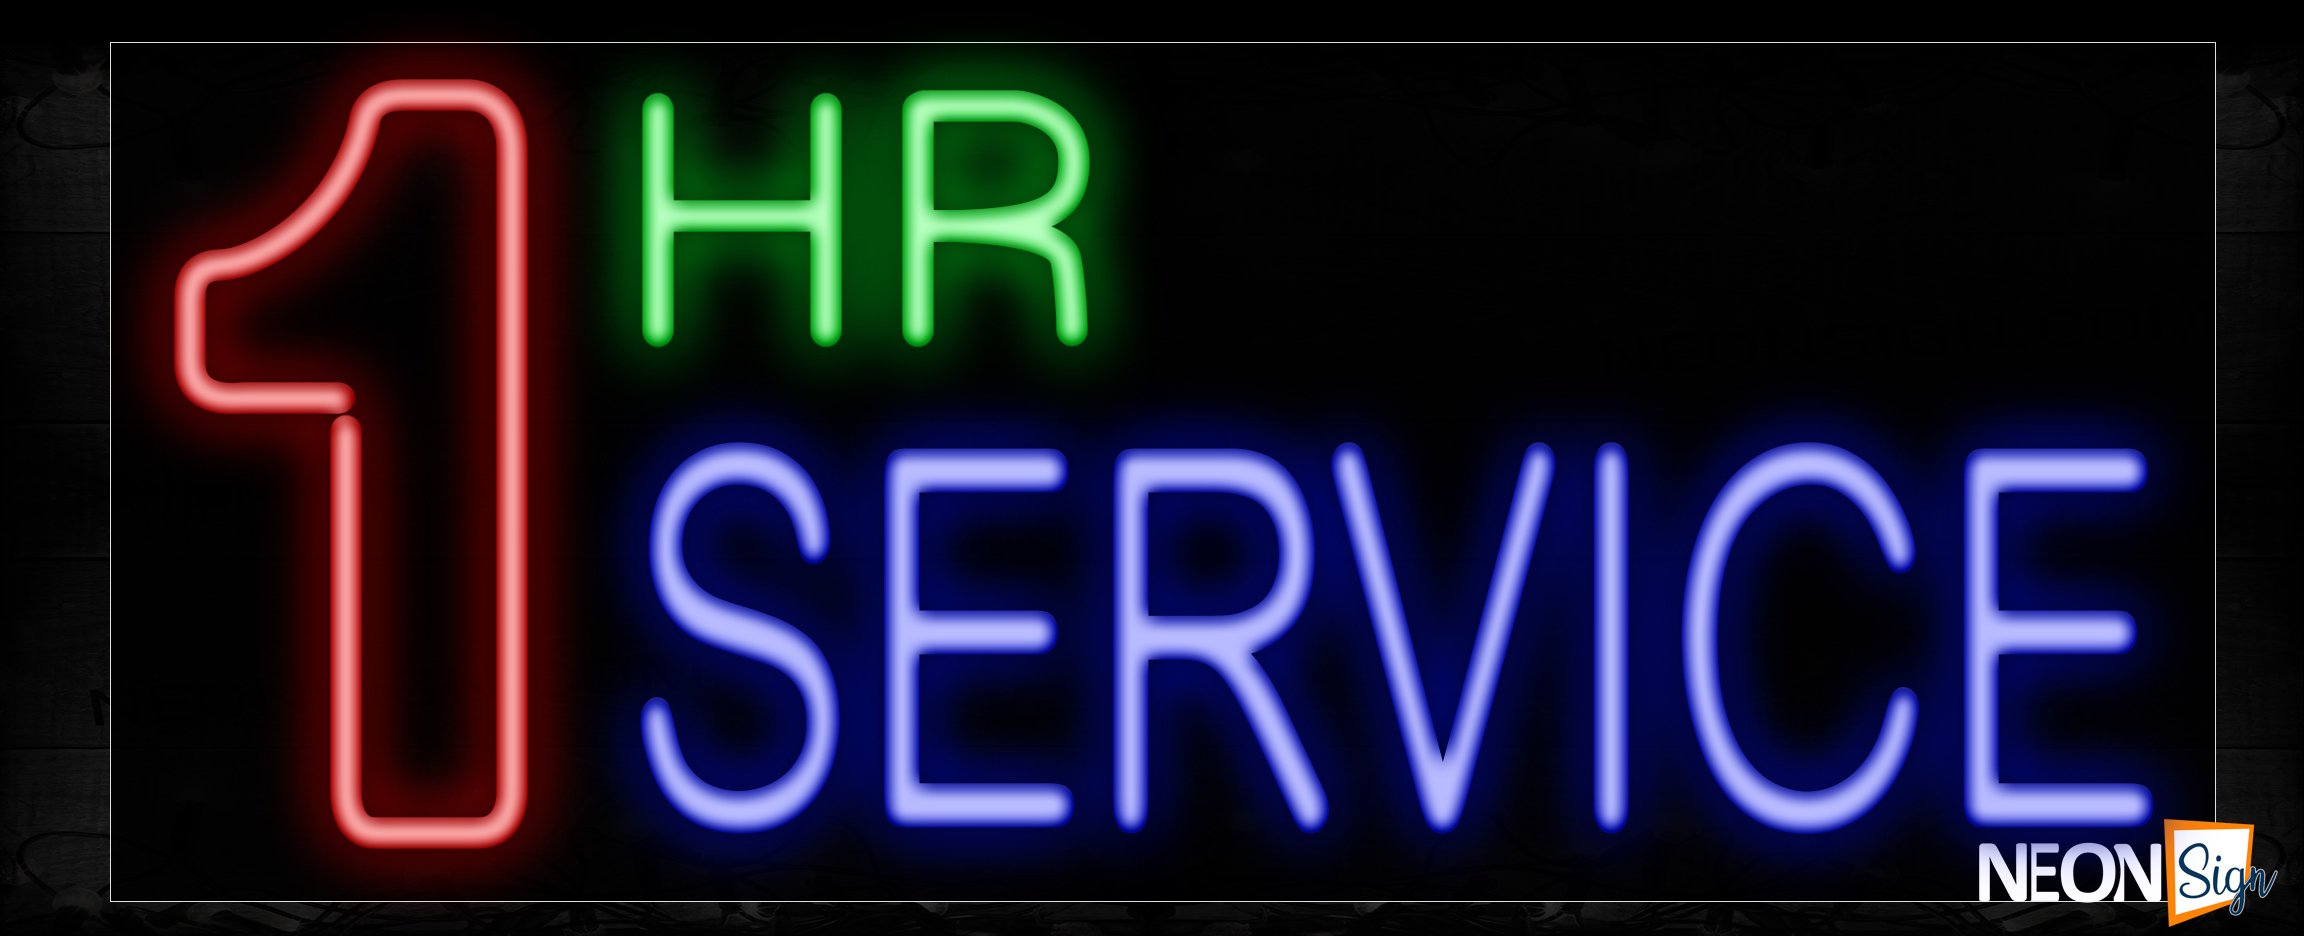 Image of 10290 1 HR SERVICE Neon Sign_13x32 Black Backing